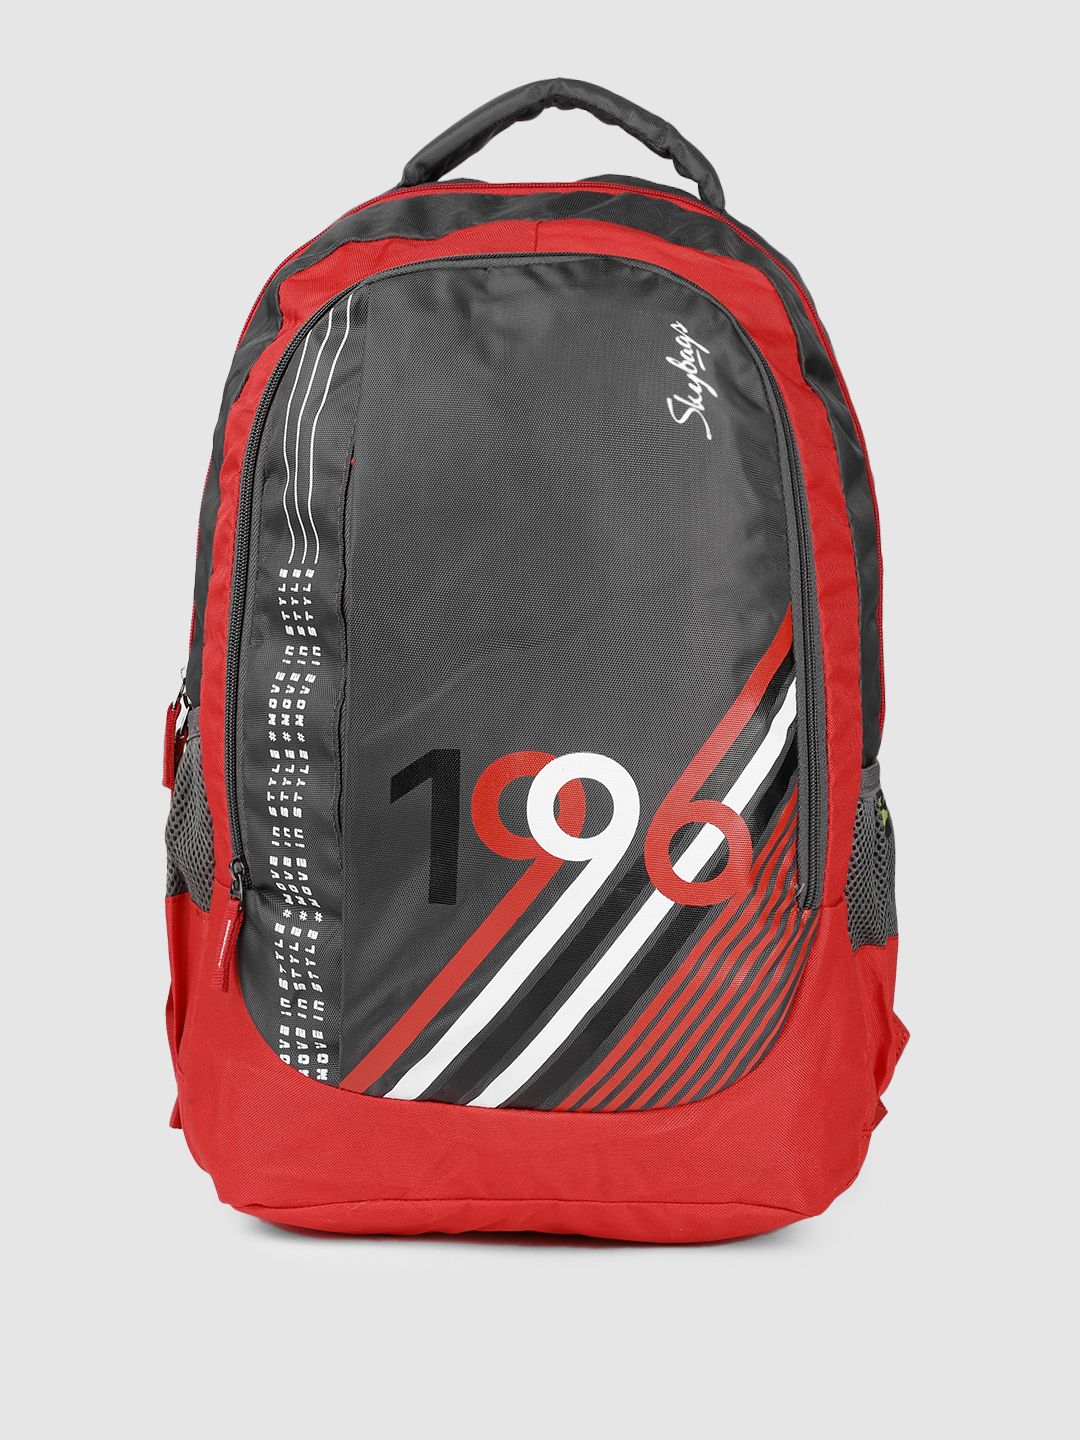 Skybags Unisex Red & Grey Colourblocked Backpack Price in India